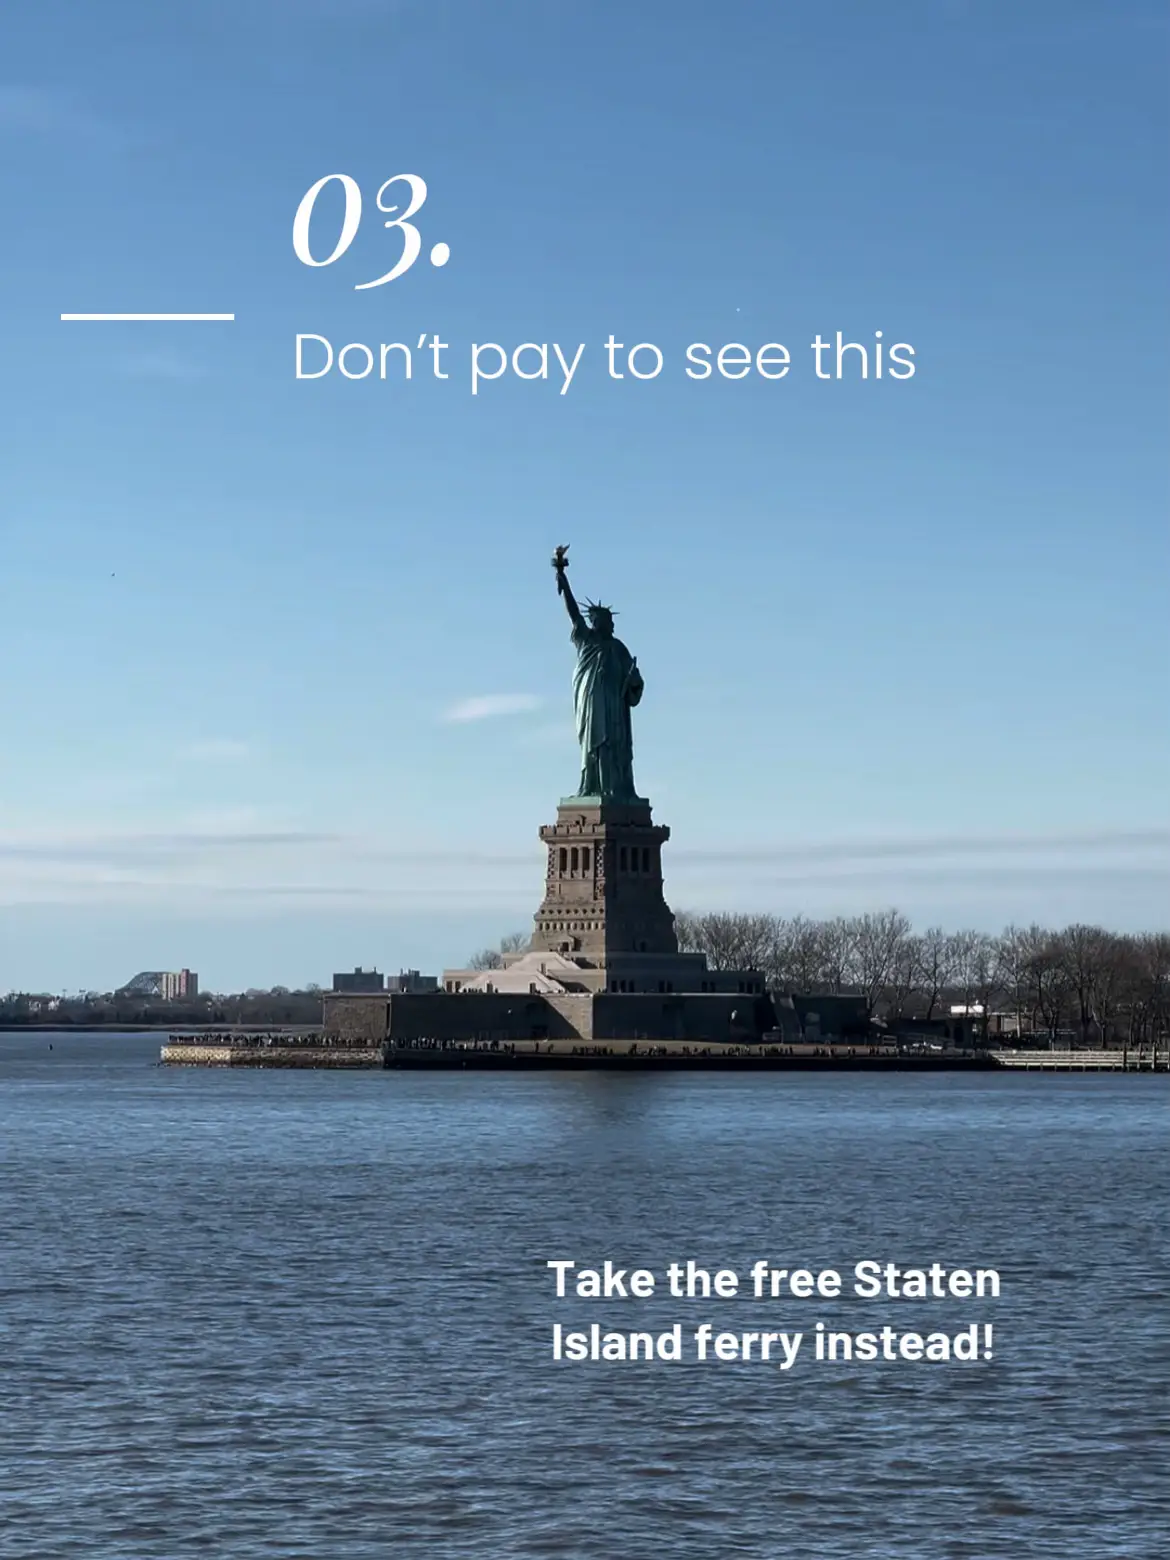  The image shows a view of the Statue of Liberty from the Staten Island ferry.